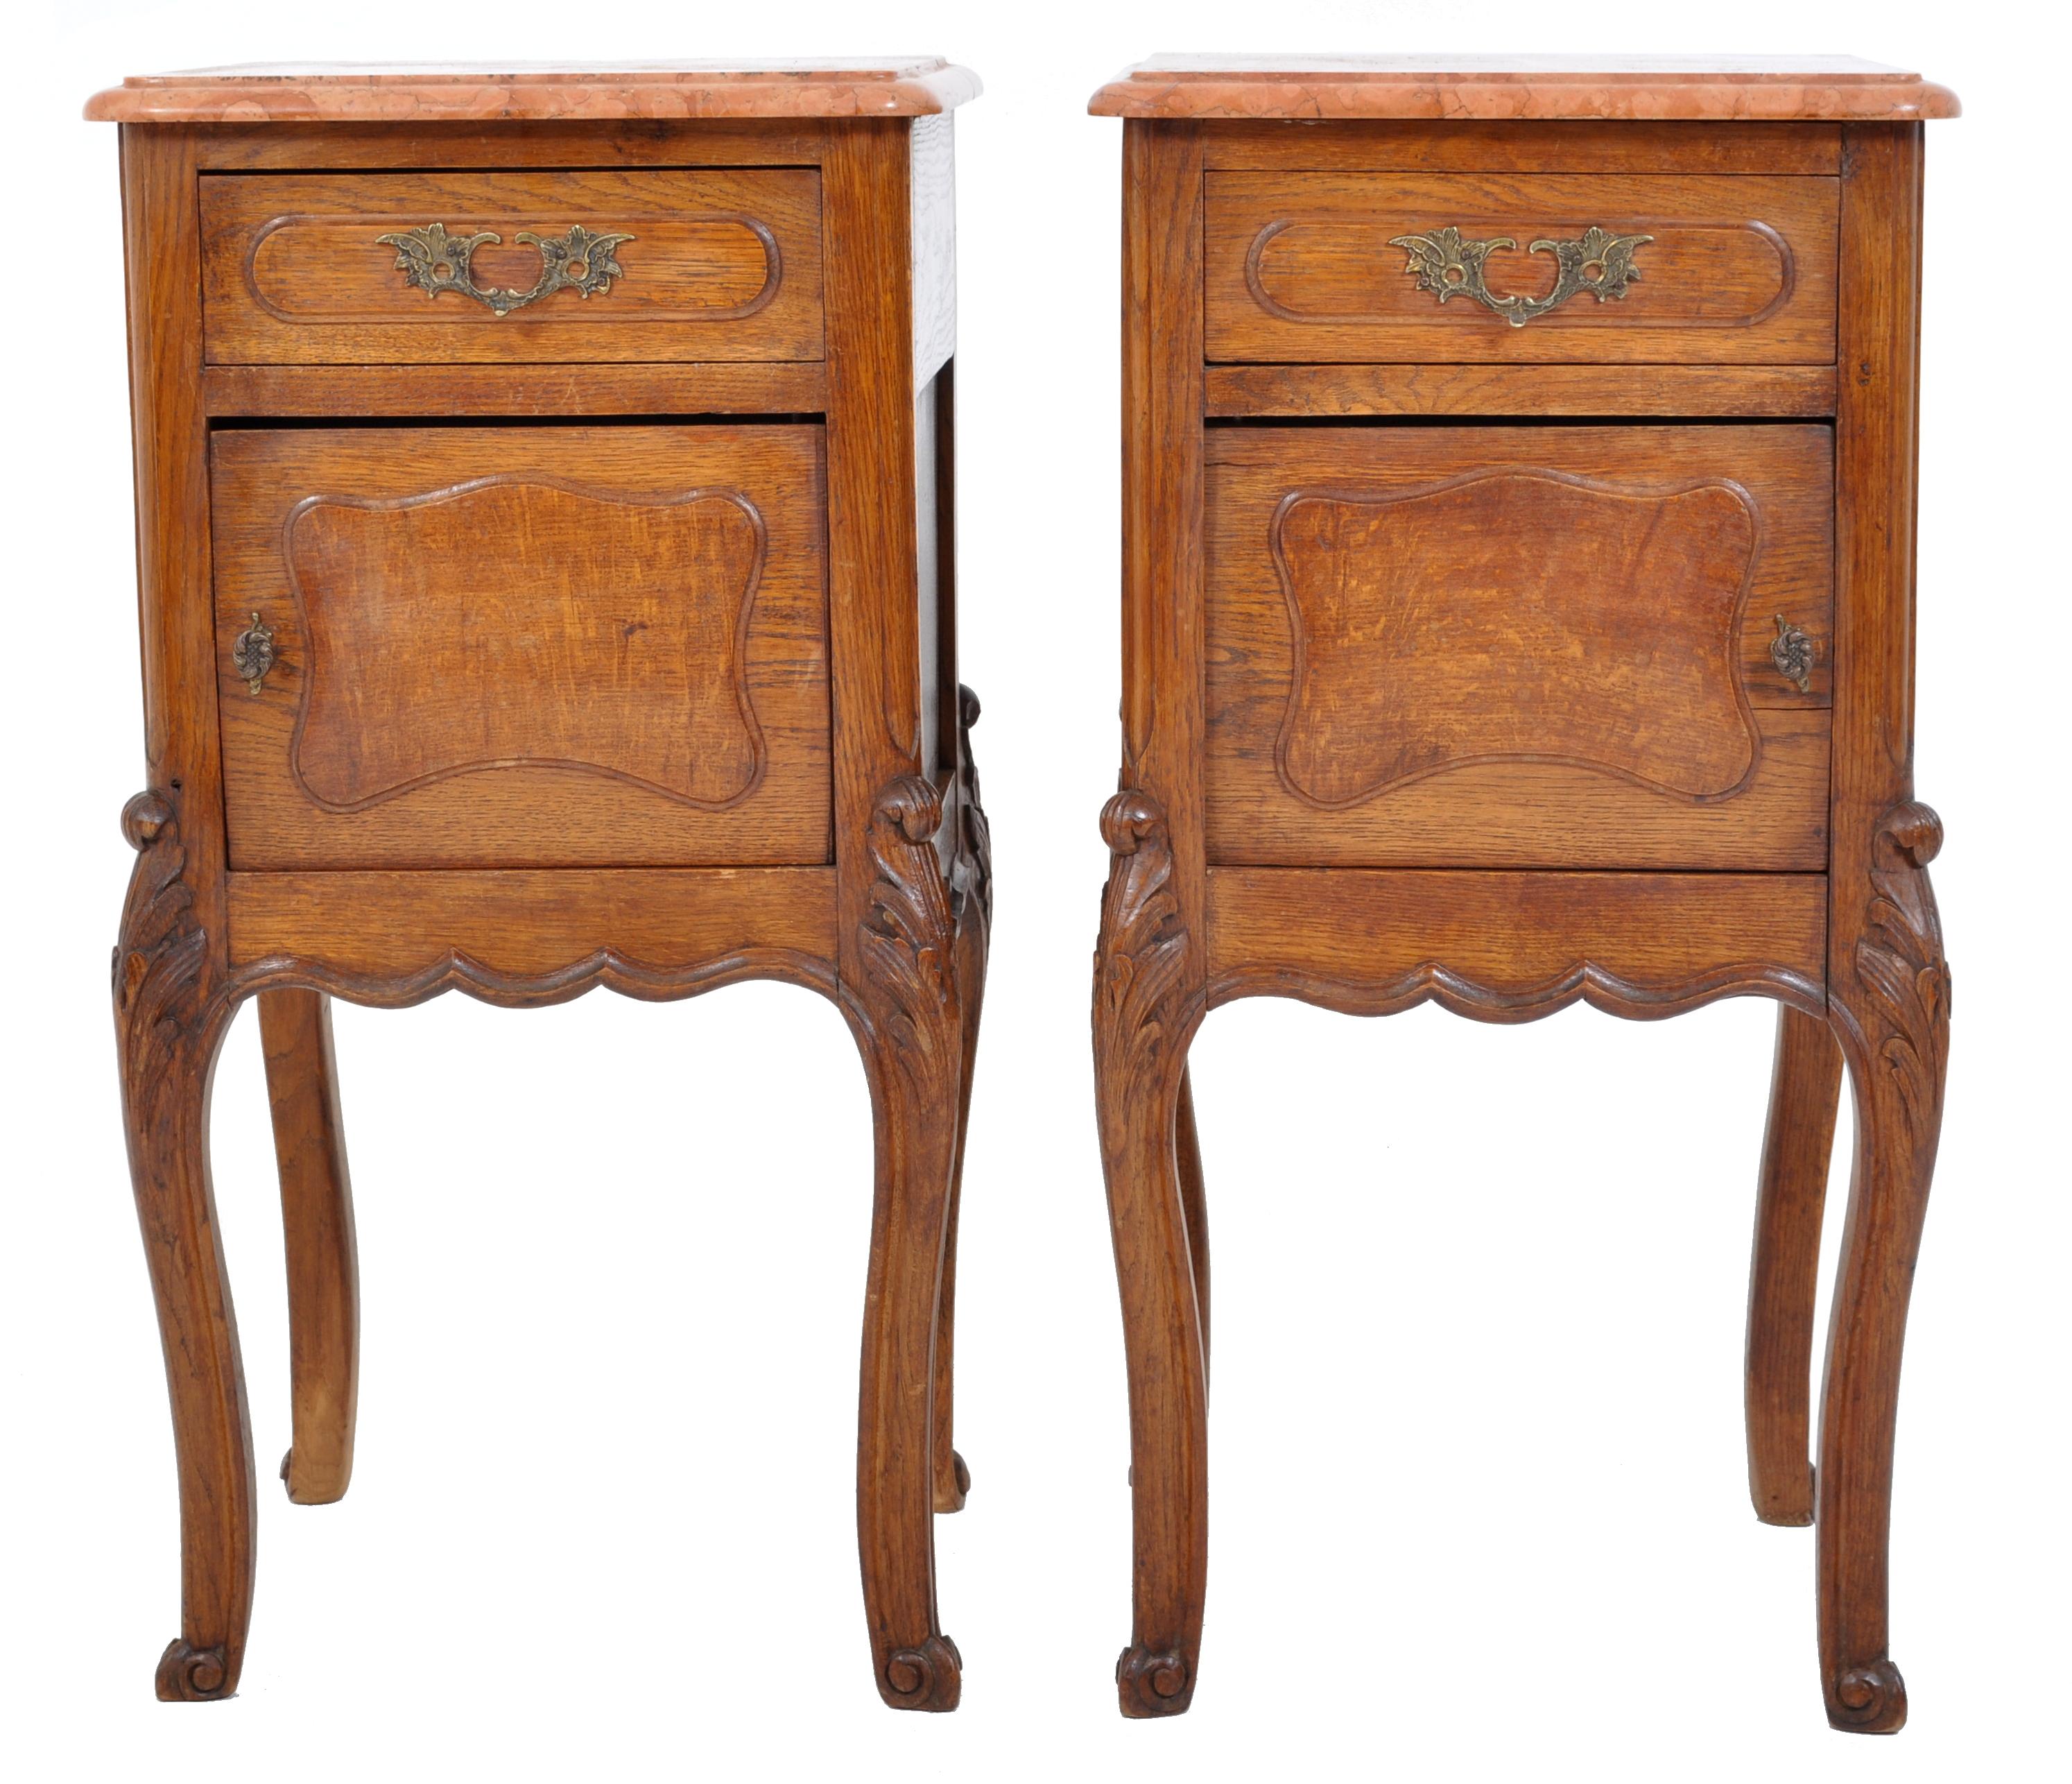 Pair of antique French Provincial carved oak marble top nightstands, circa 1890. The nightstands having variegated salmon colored marble tops, each stand having a single drawer with gilded bronze handles and a panel covered door below. The stands